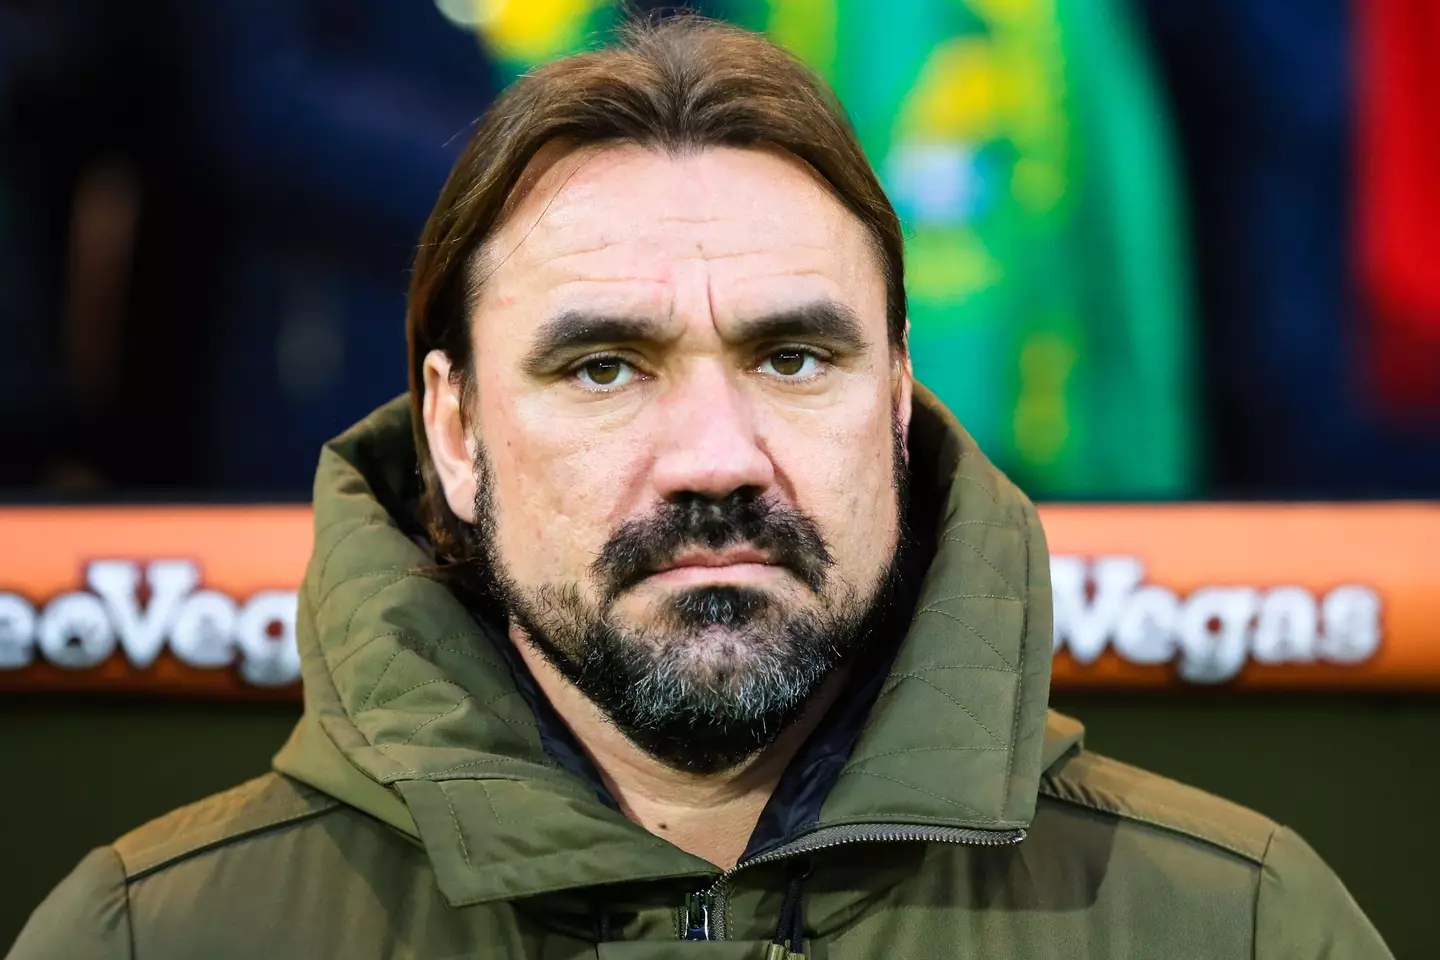 Daniel Farke is among a group of foreign players and coaches to have already left their Russian clubs (Image: PA)